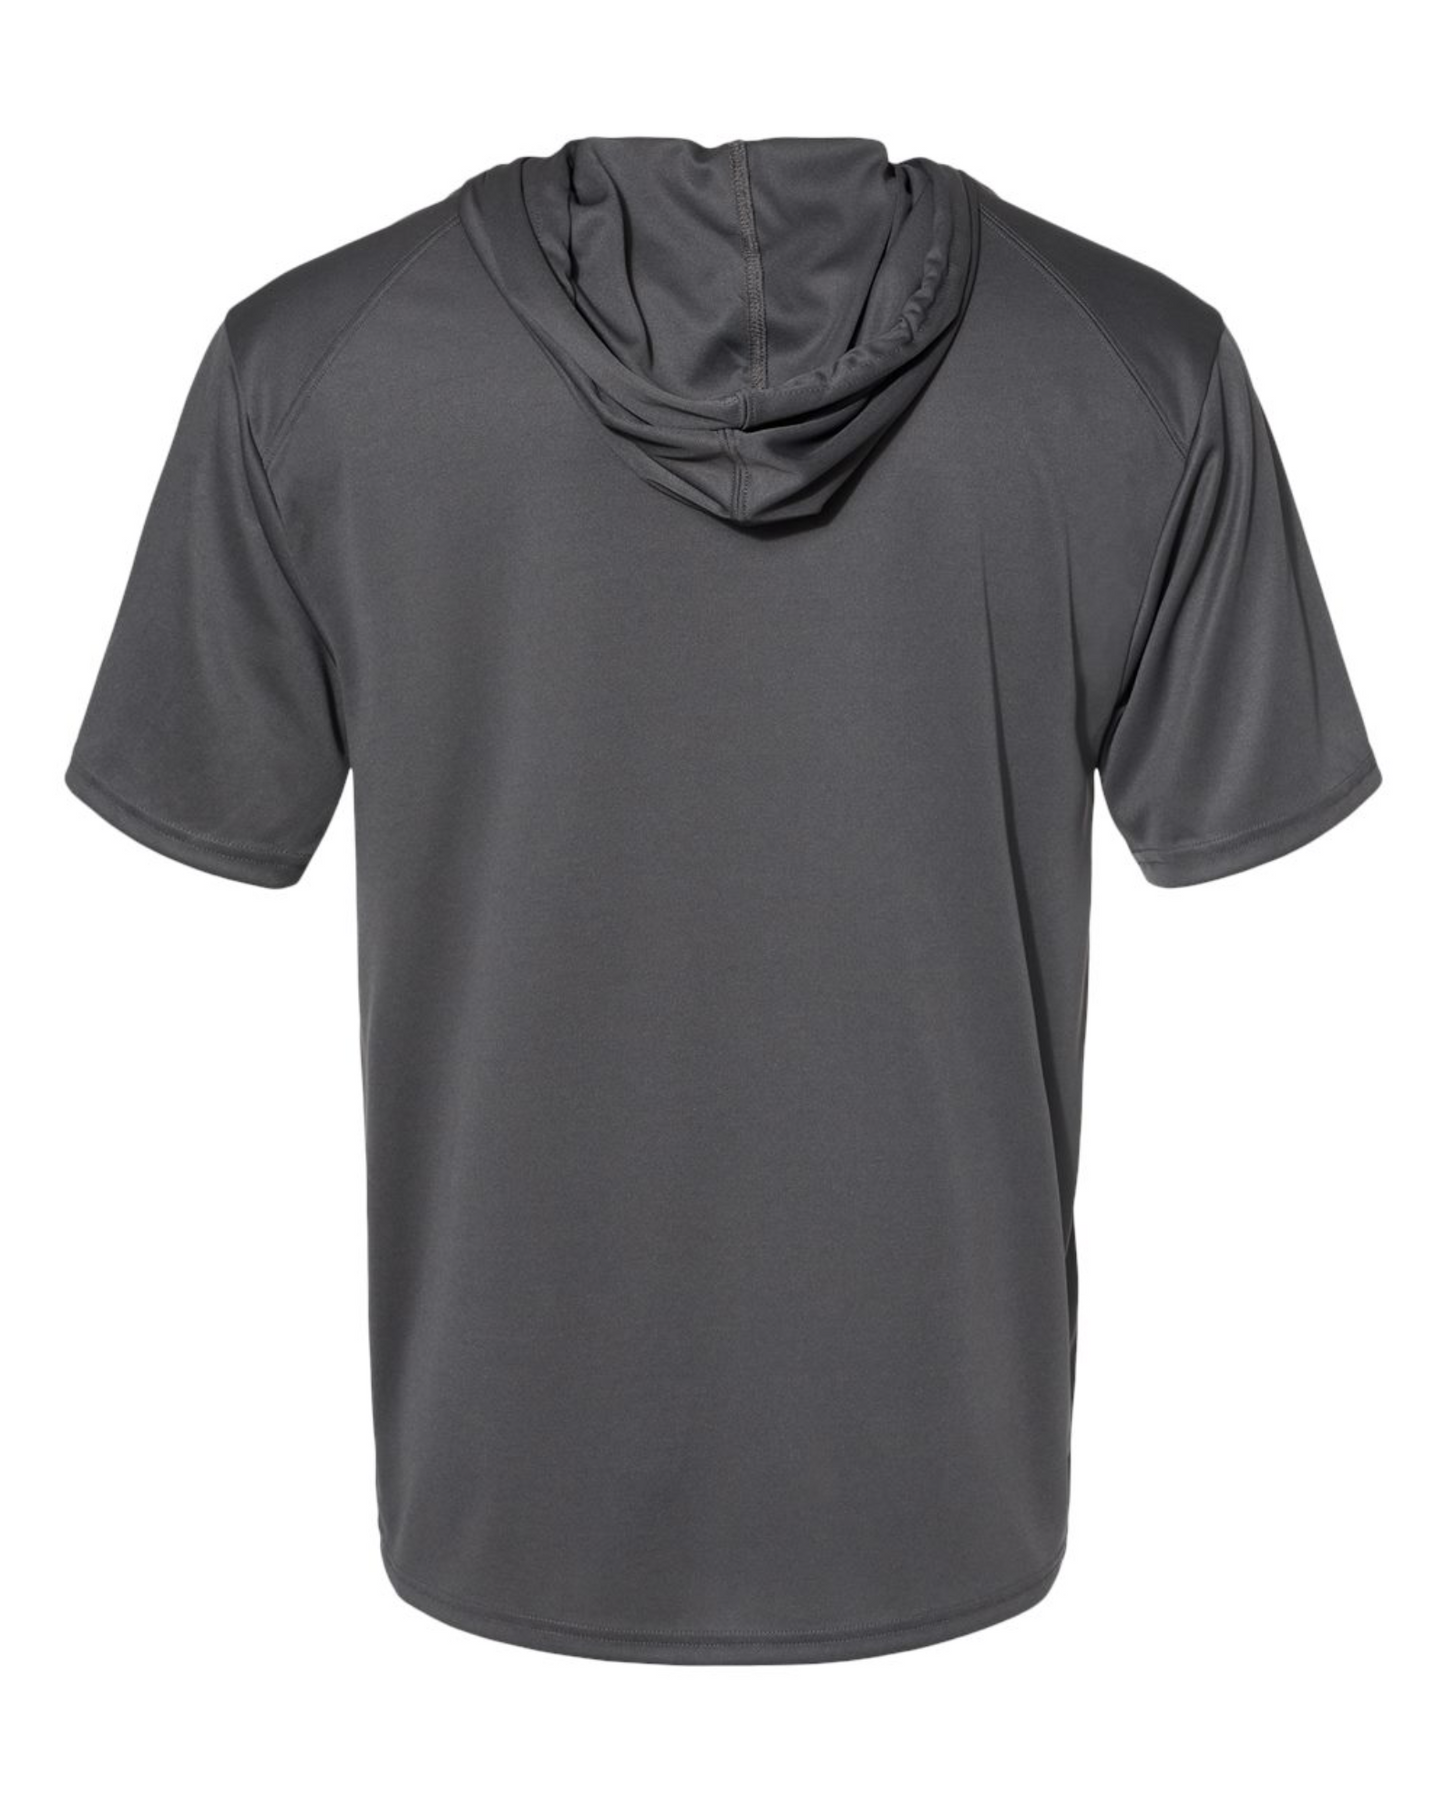 Hooded Activewear: Eye Am (Black Patch)